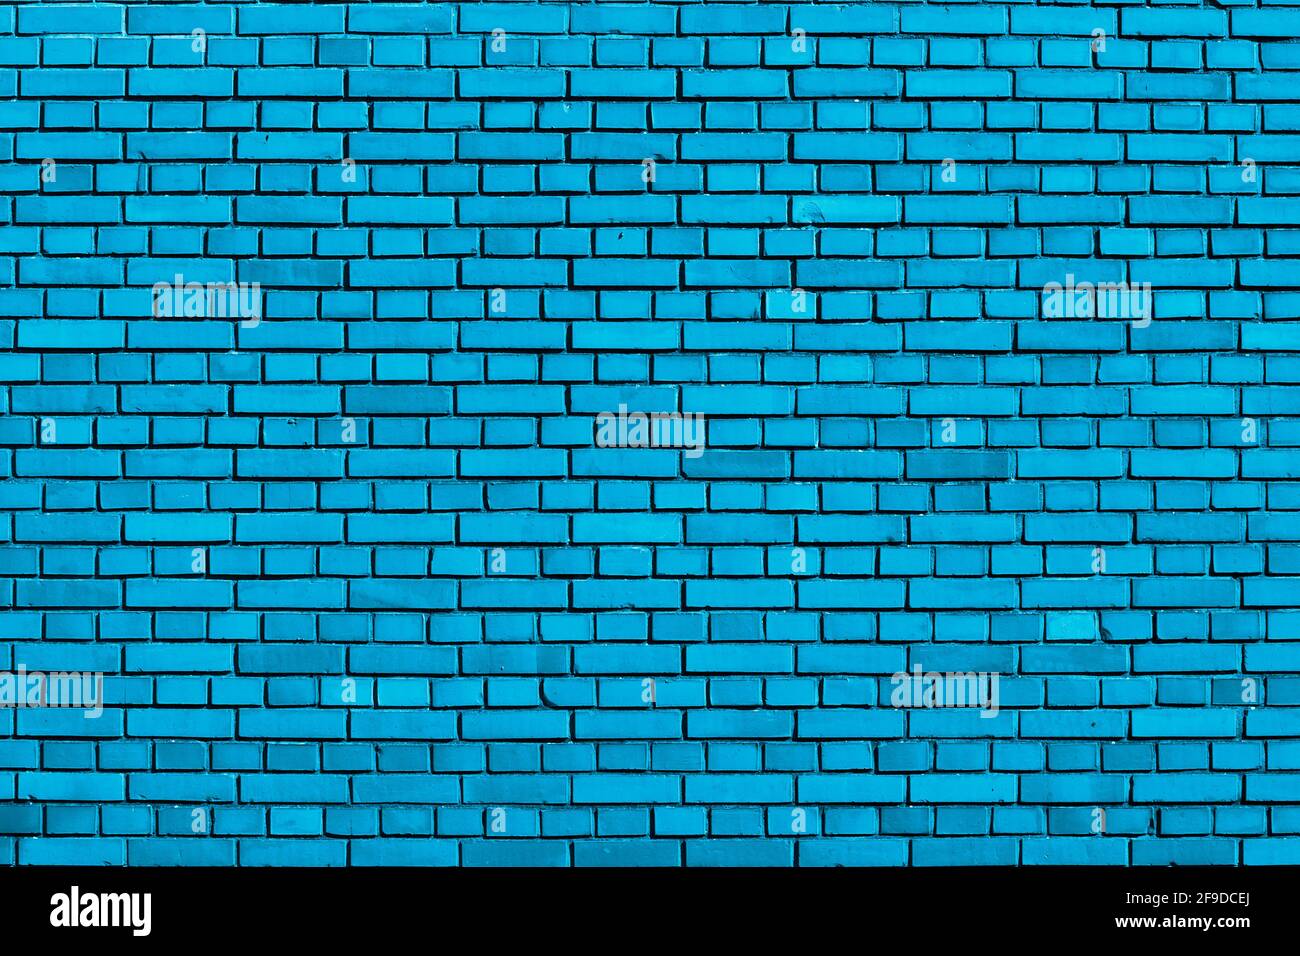 light blue colored brick wall background Stock Photo